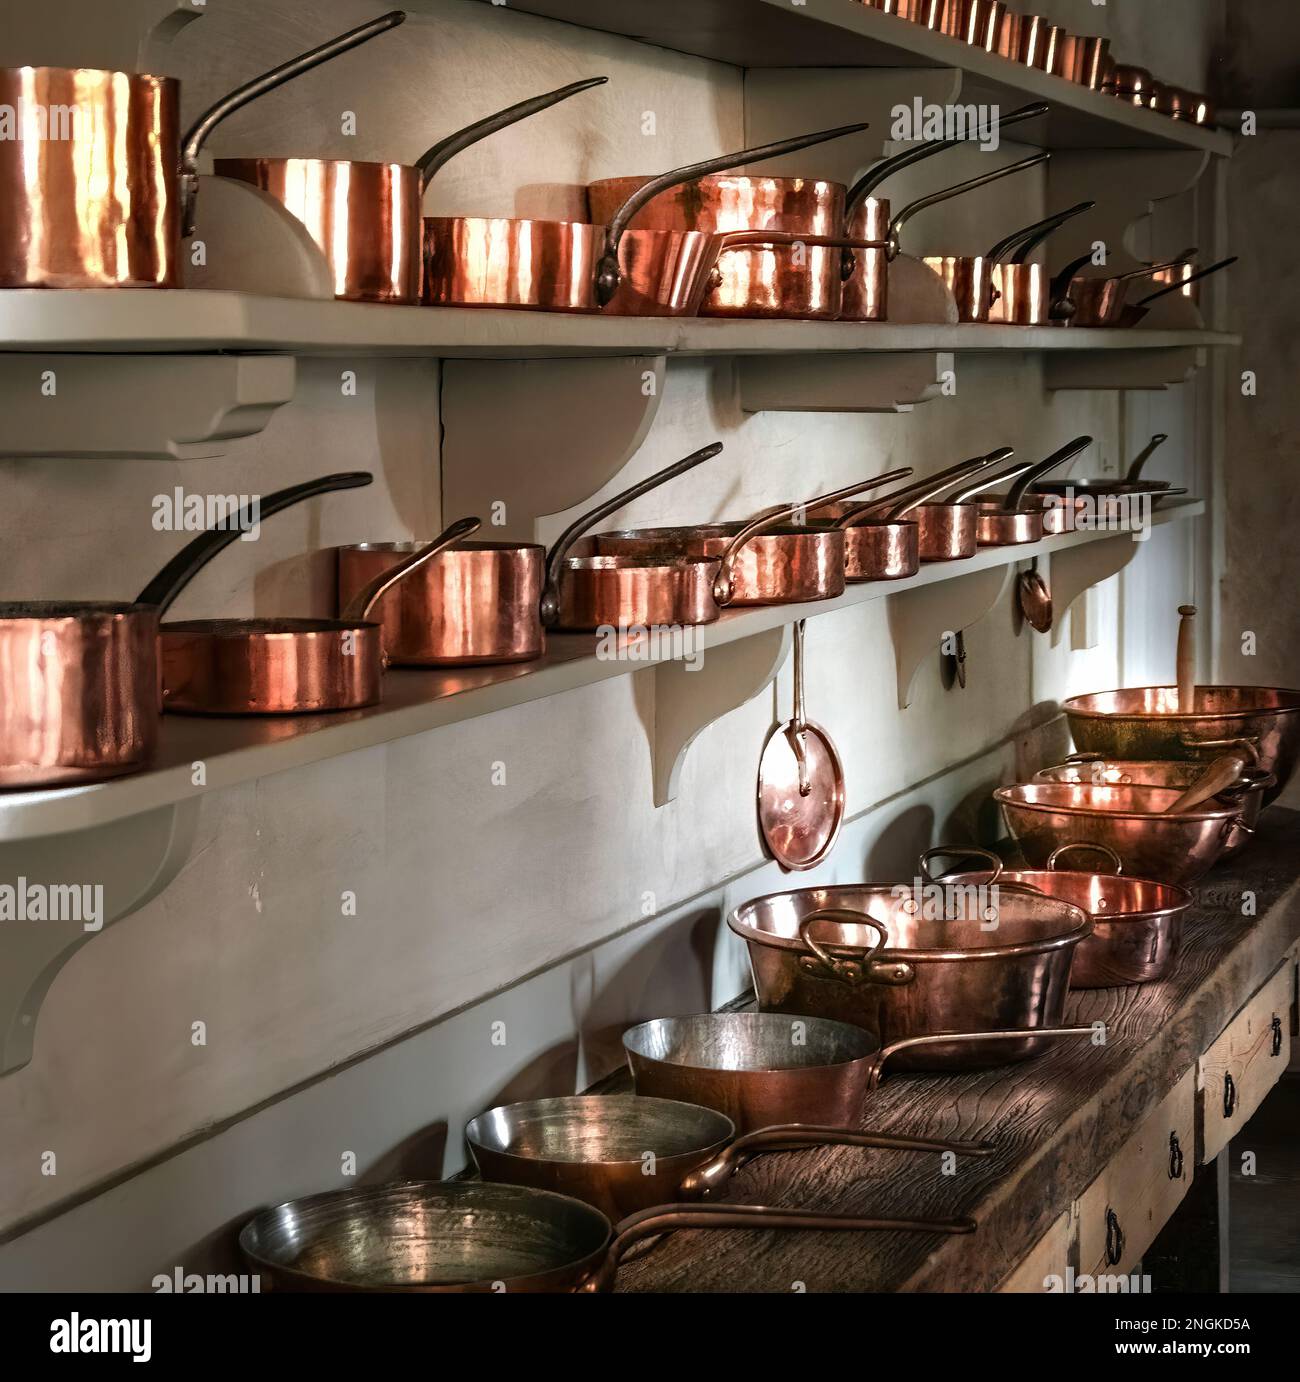 https://c8.alamy.com/comp/2NGKD5A/victorian-kitchen-showing-dozens-of-copper-pots-and-pans-2NGKD5A.jpg